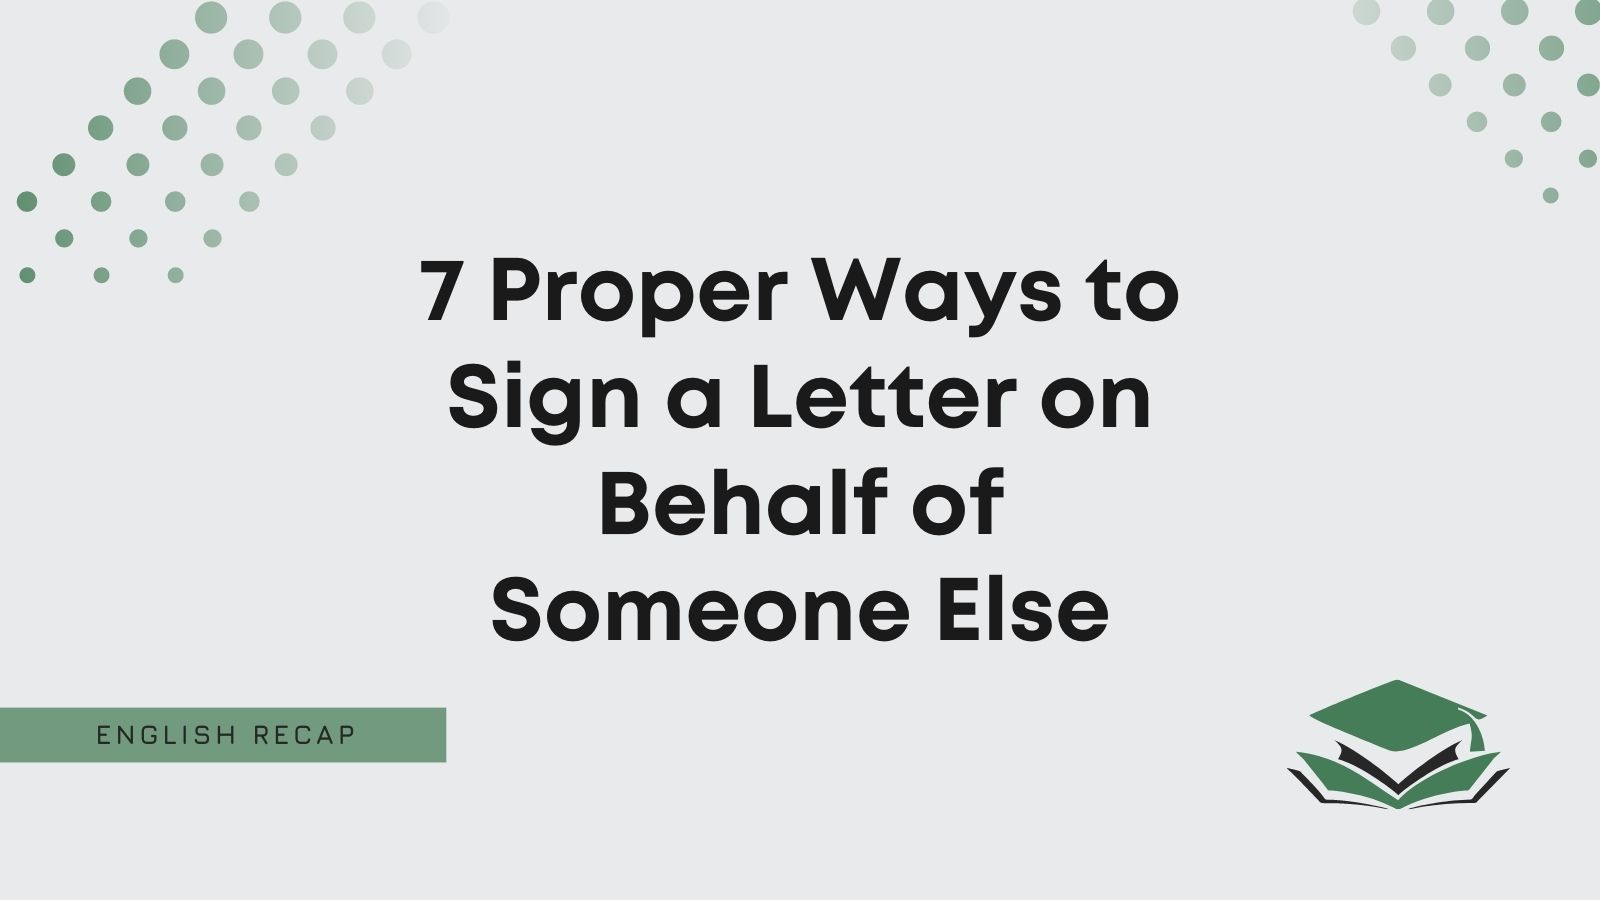 7 Proper Ways to Sign a Letter on Behalf of Someone Else English Recap